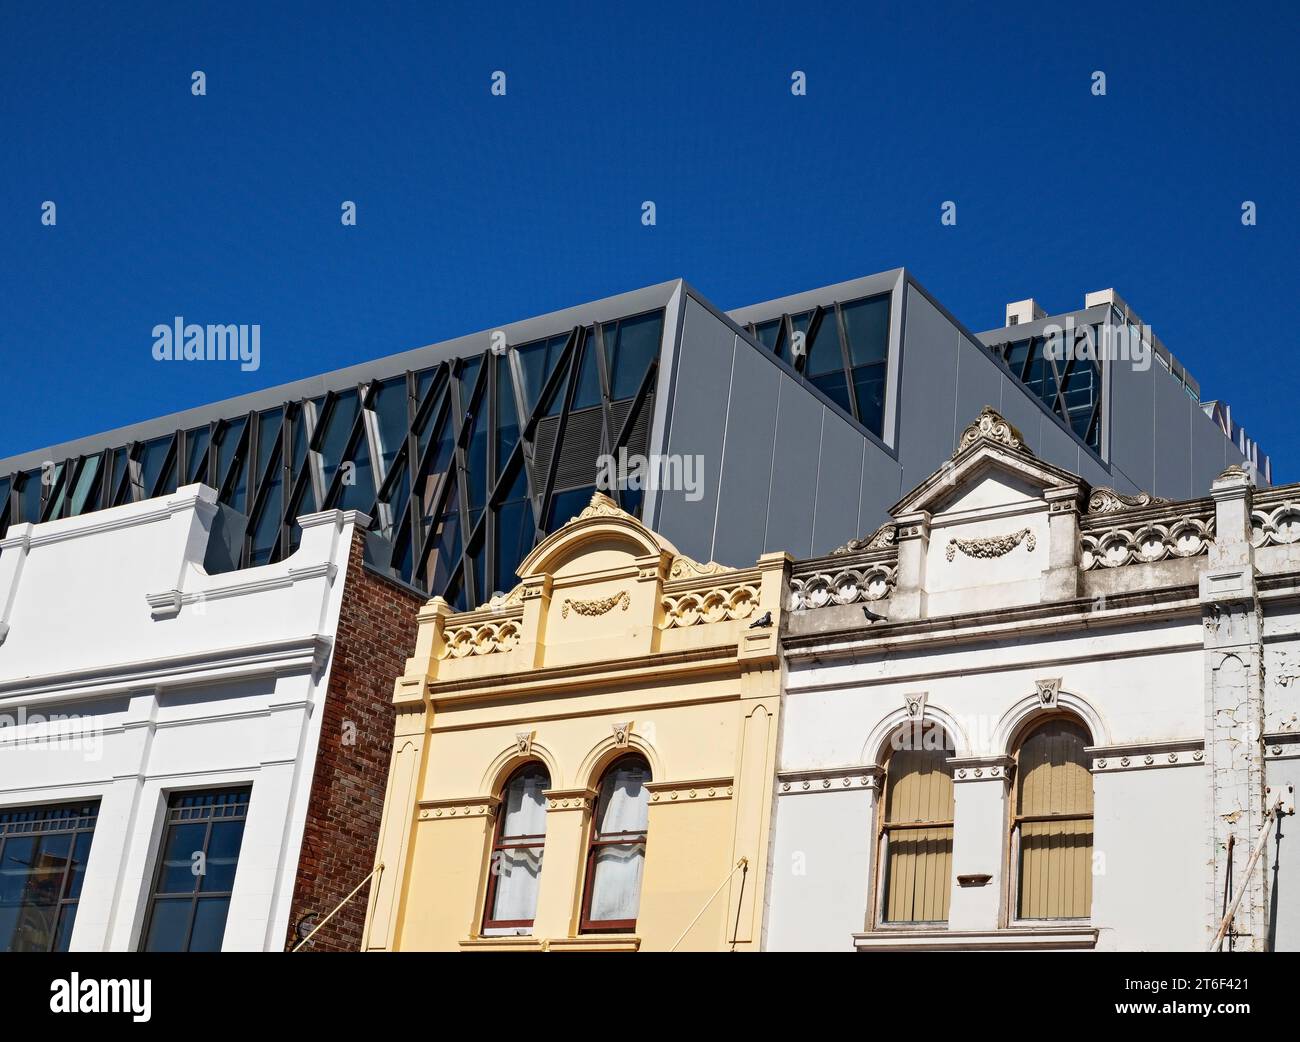 Melbourne Australia /  Penny Lane Arcade retail and prestige Penny Lane Apartments located in Puckle Street; Moonee Ponds. Stock Photo